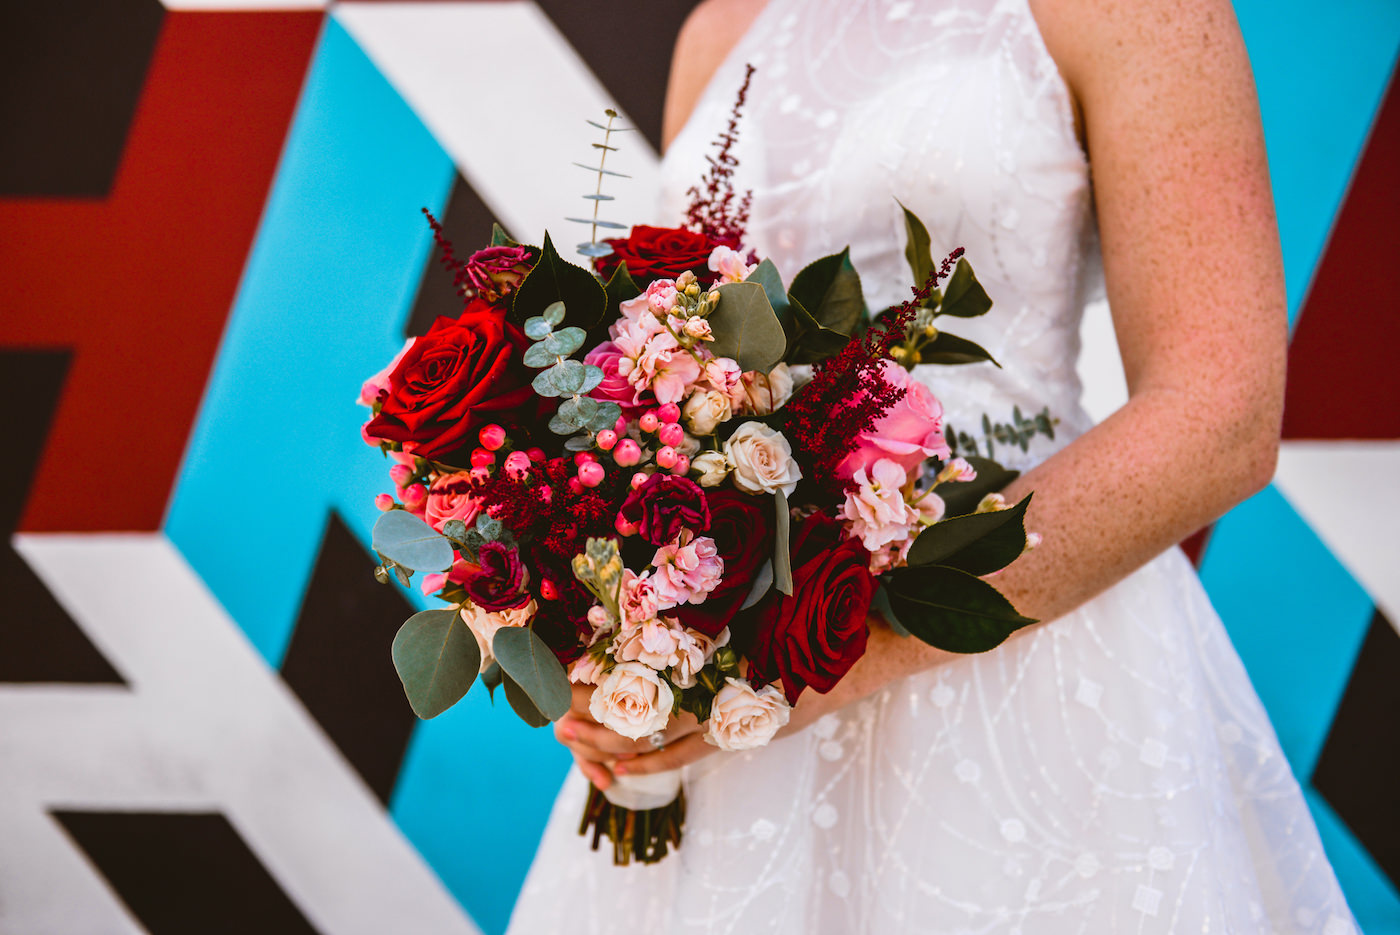 Bridal Bouquet with Deep Red Maroon Roses and Blush Pink Hypericum Berries with Freesia and Astilbe and Eucalyptus Greenery